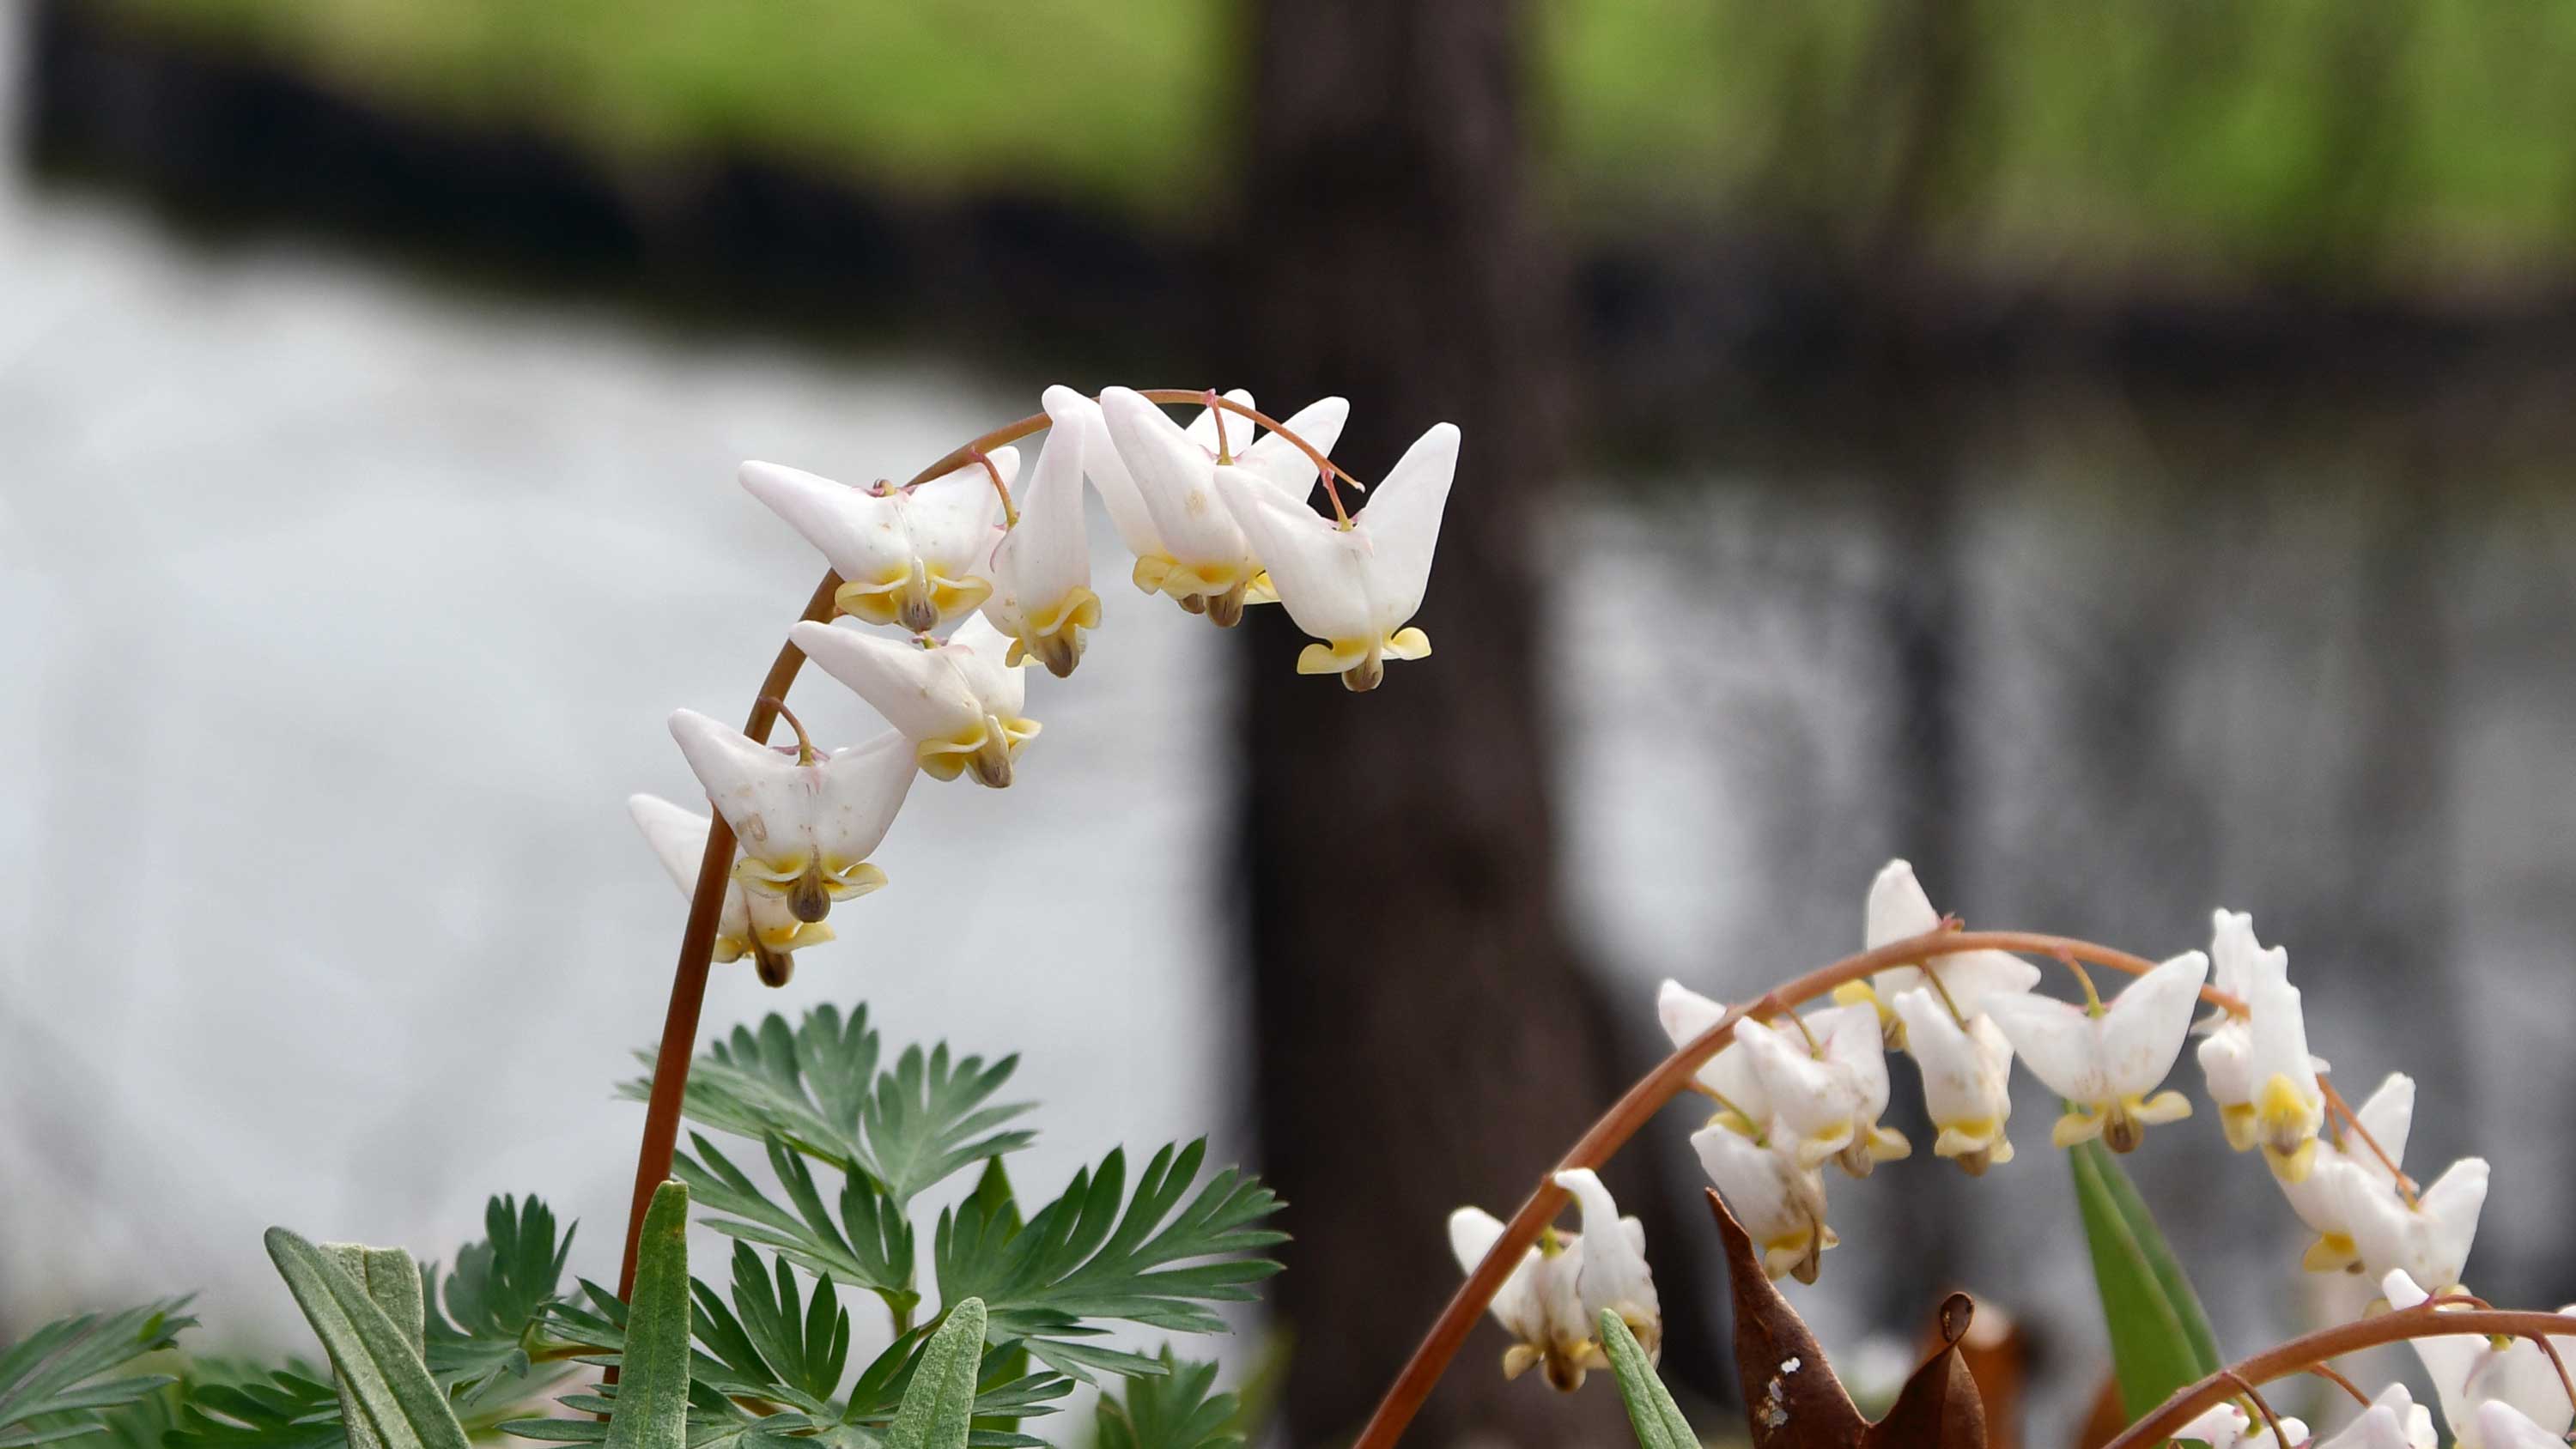 The white blooms of dutchman's breeches.